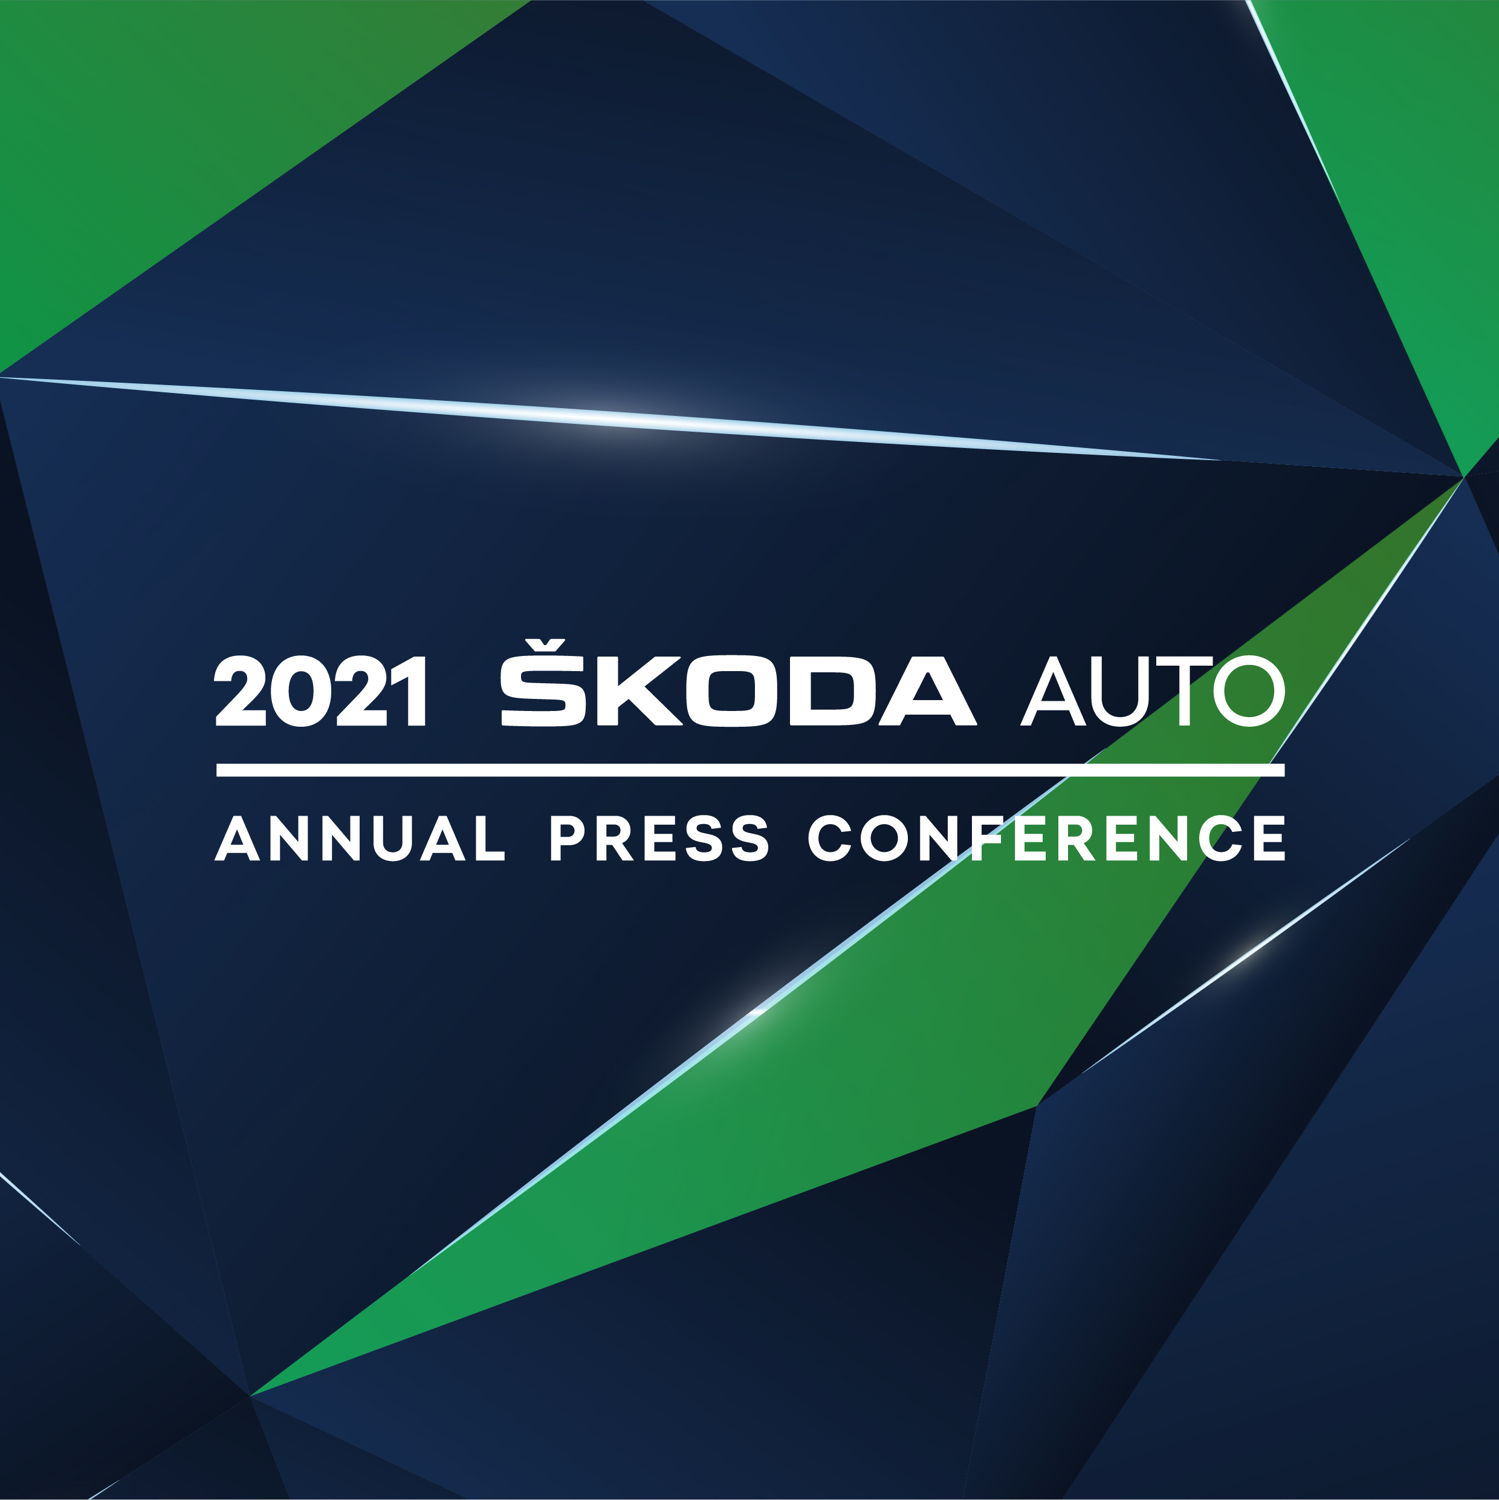 The car manufacturer will be broadcasting the 
presentation live on the ŠKODA Storyboard. The event 
begins on Wednesday, 24 March, at 10:00 CET.